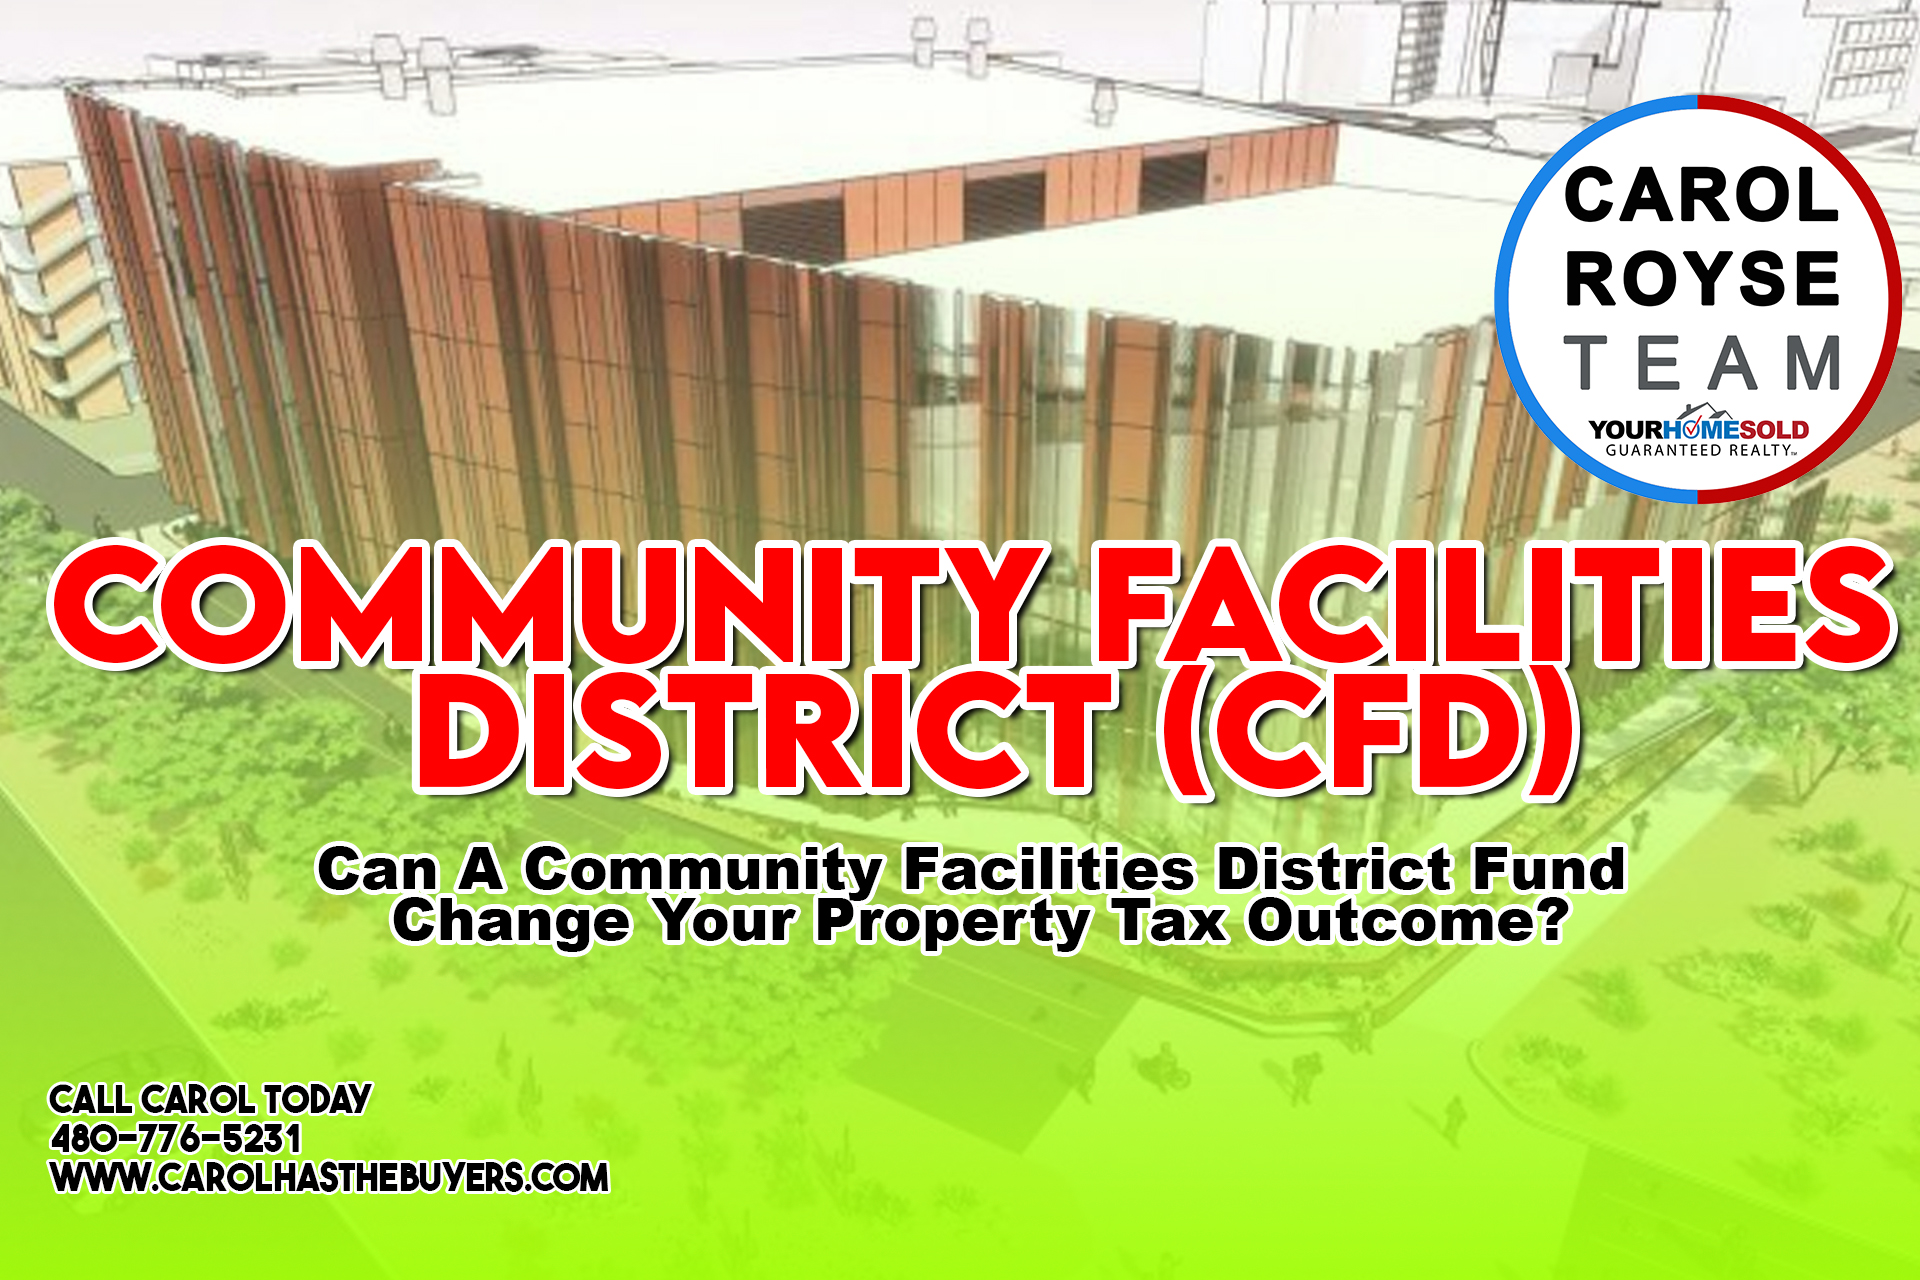 Can A Community Facilities District Fund Change Your Property Tax Outcome?